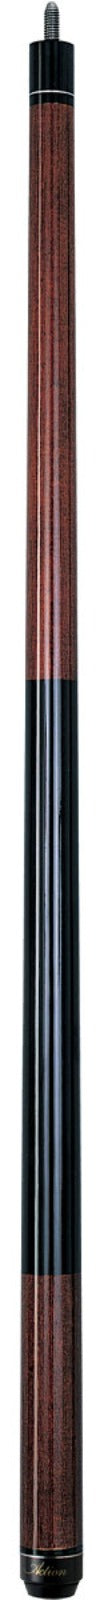 Action STR04 - Brown Pool Cue -Action